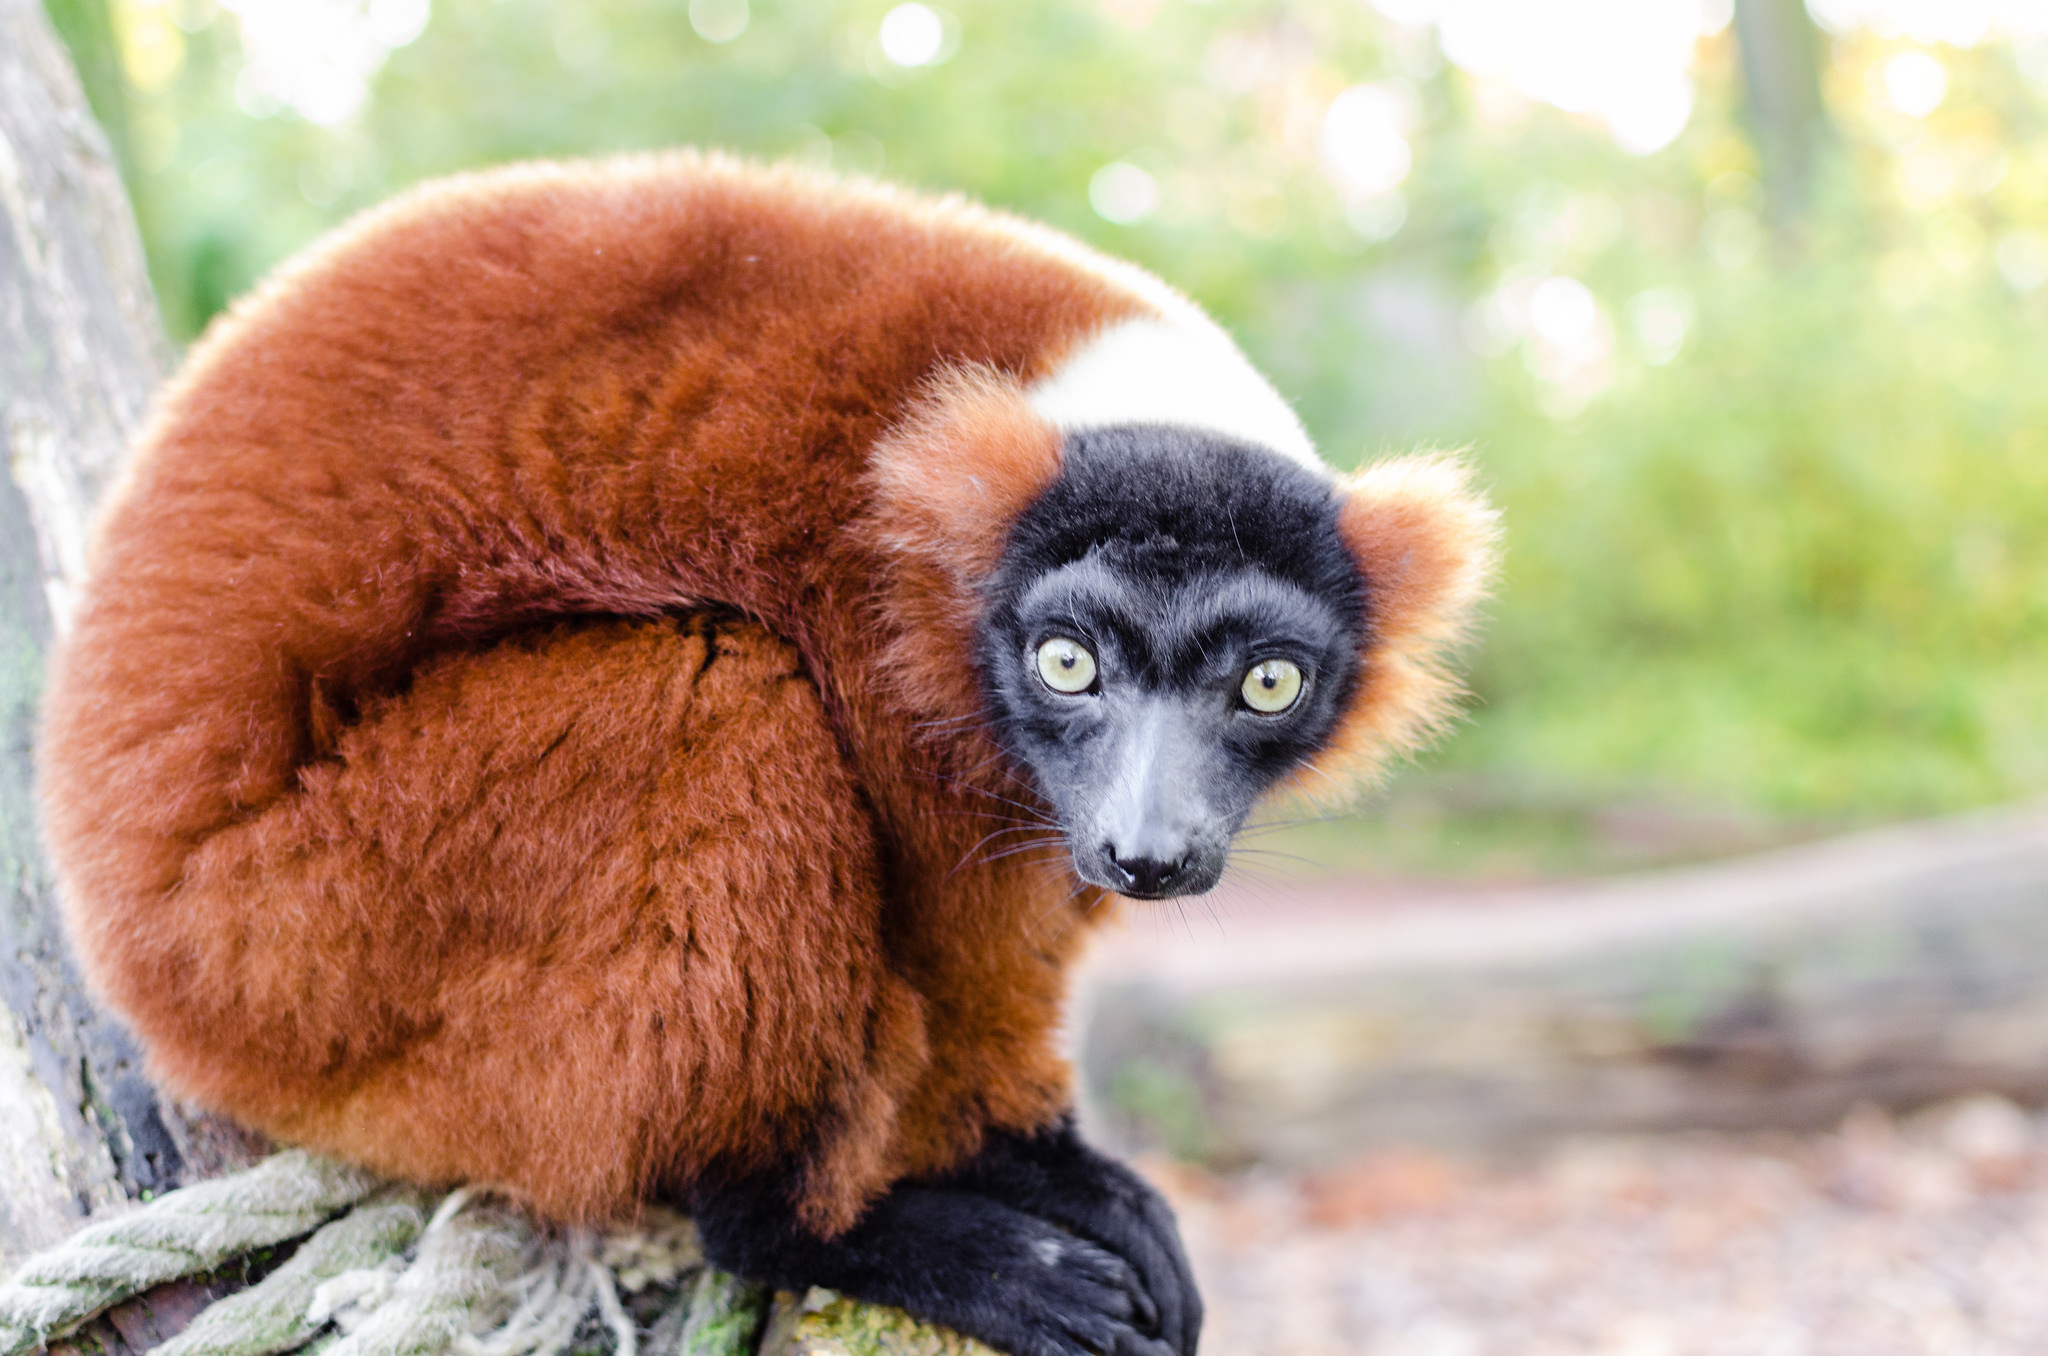 Lemurs Become The Most Endangered Group Of Mammals On Earth